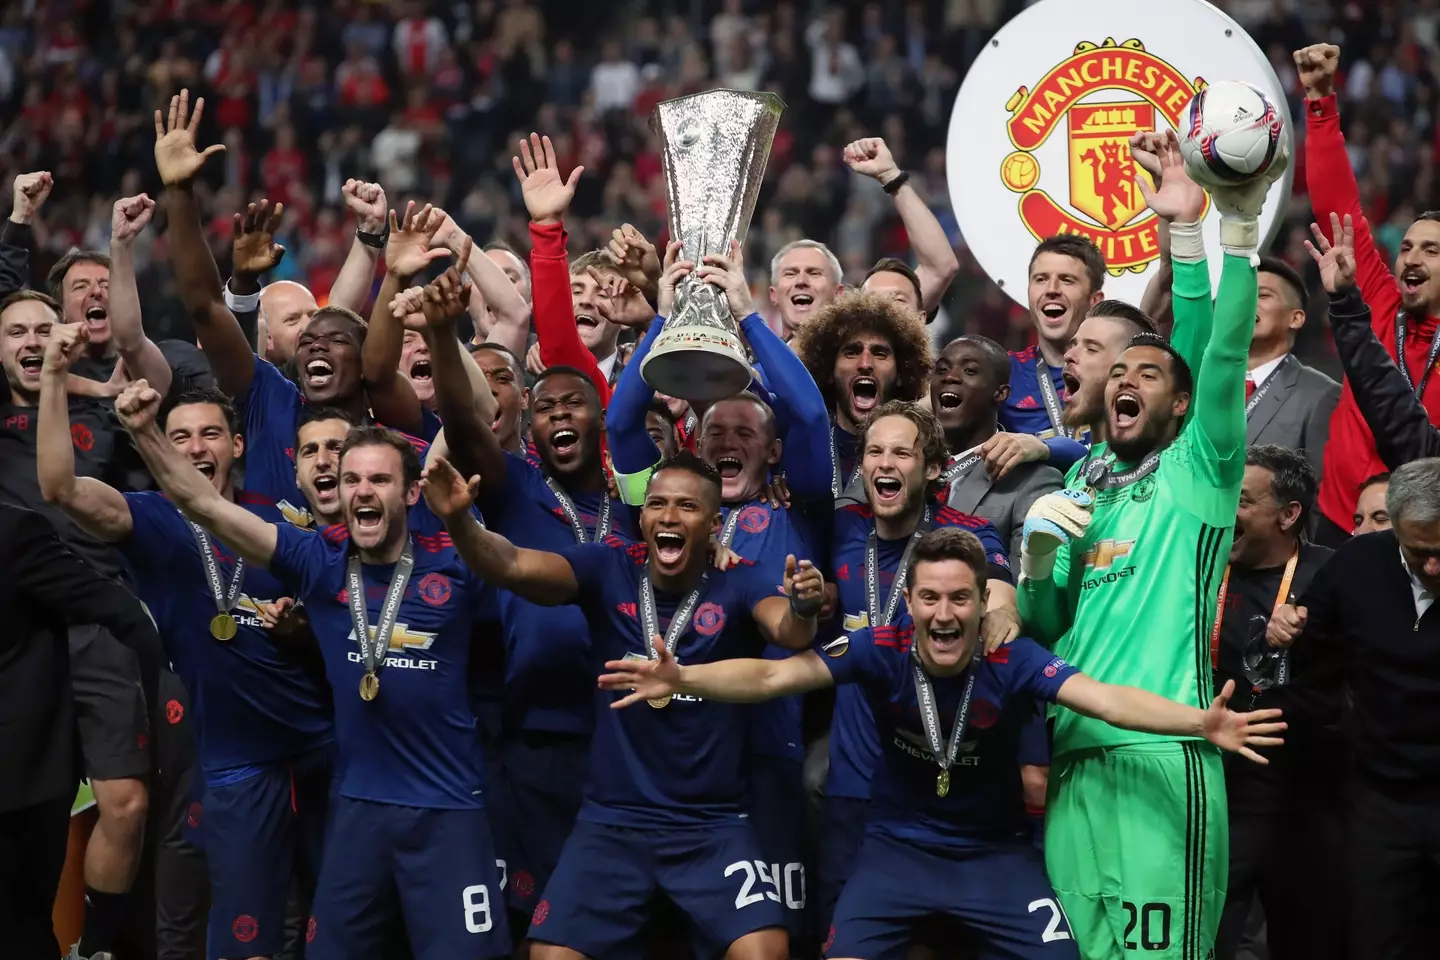 Manchester United won the Europa League for the first time in 2017, however have failed to win it since despite reaching the final again in 2021. (Alamy)